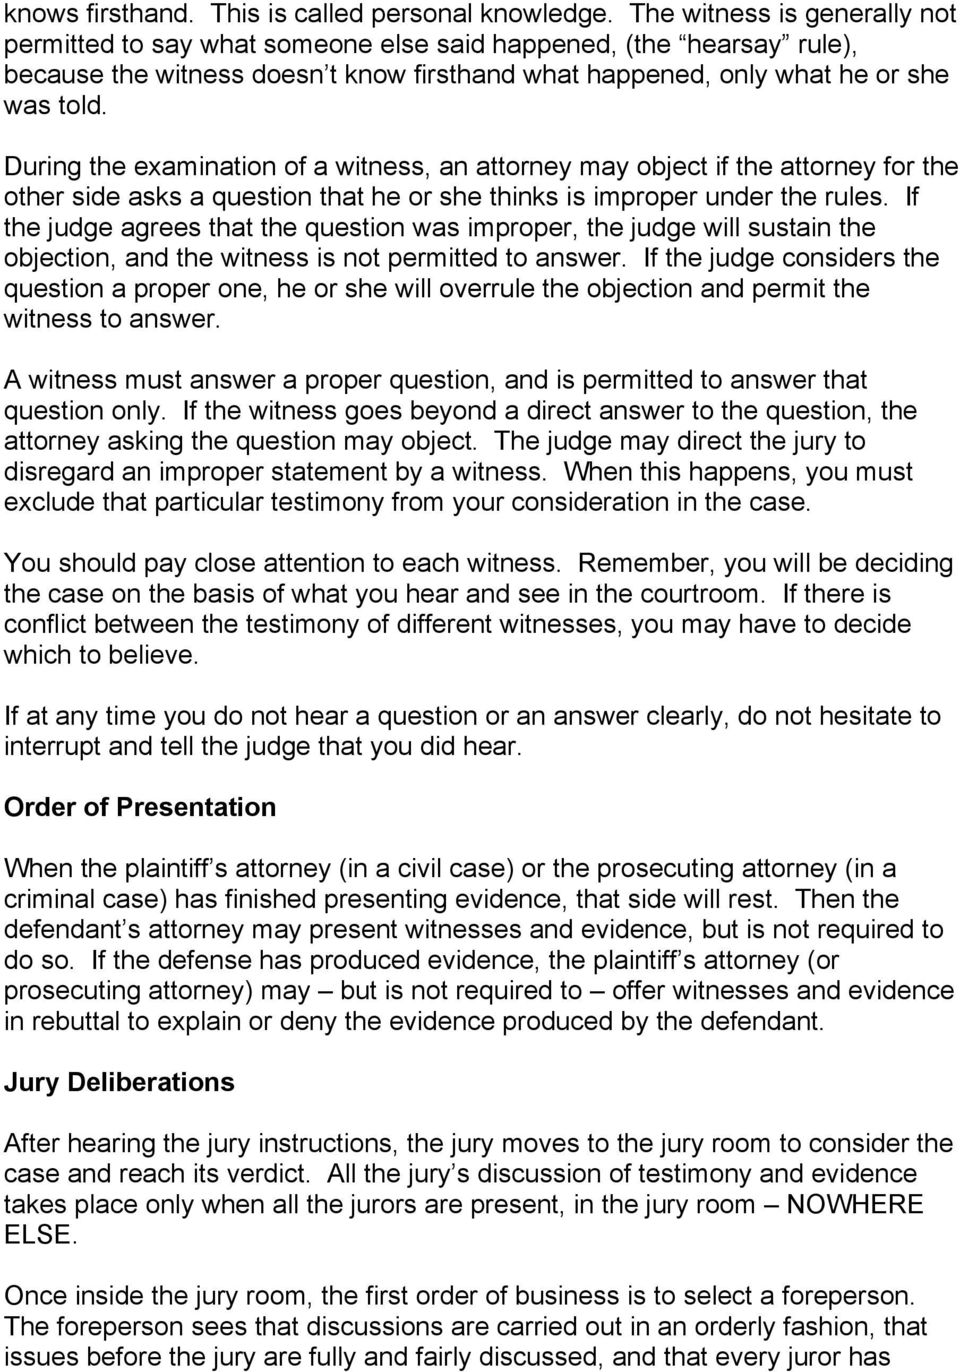 During the examination of a witness, an attorney may object if the attorney for the other side asks a question that he or she thinks is improper under the rules.